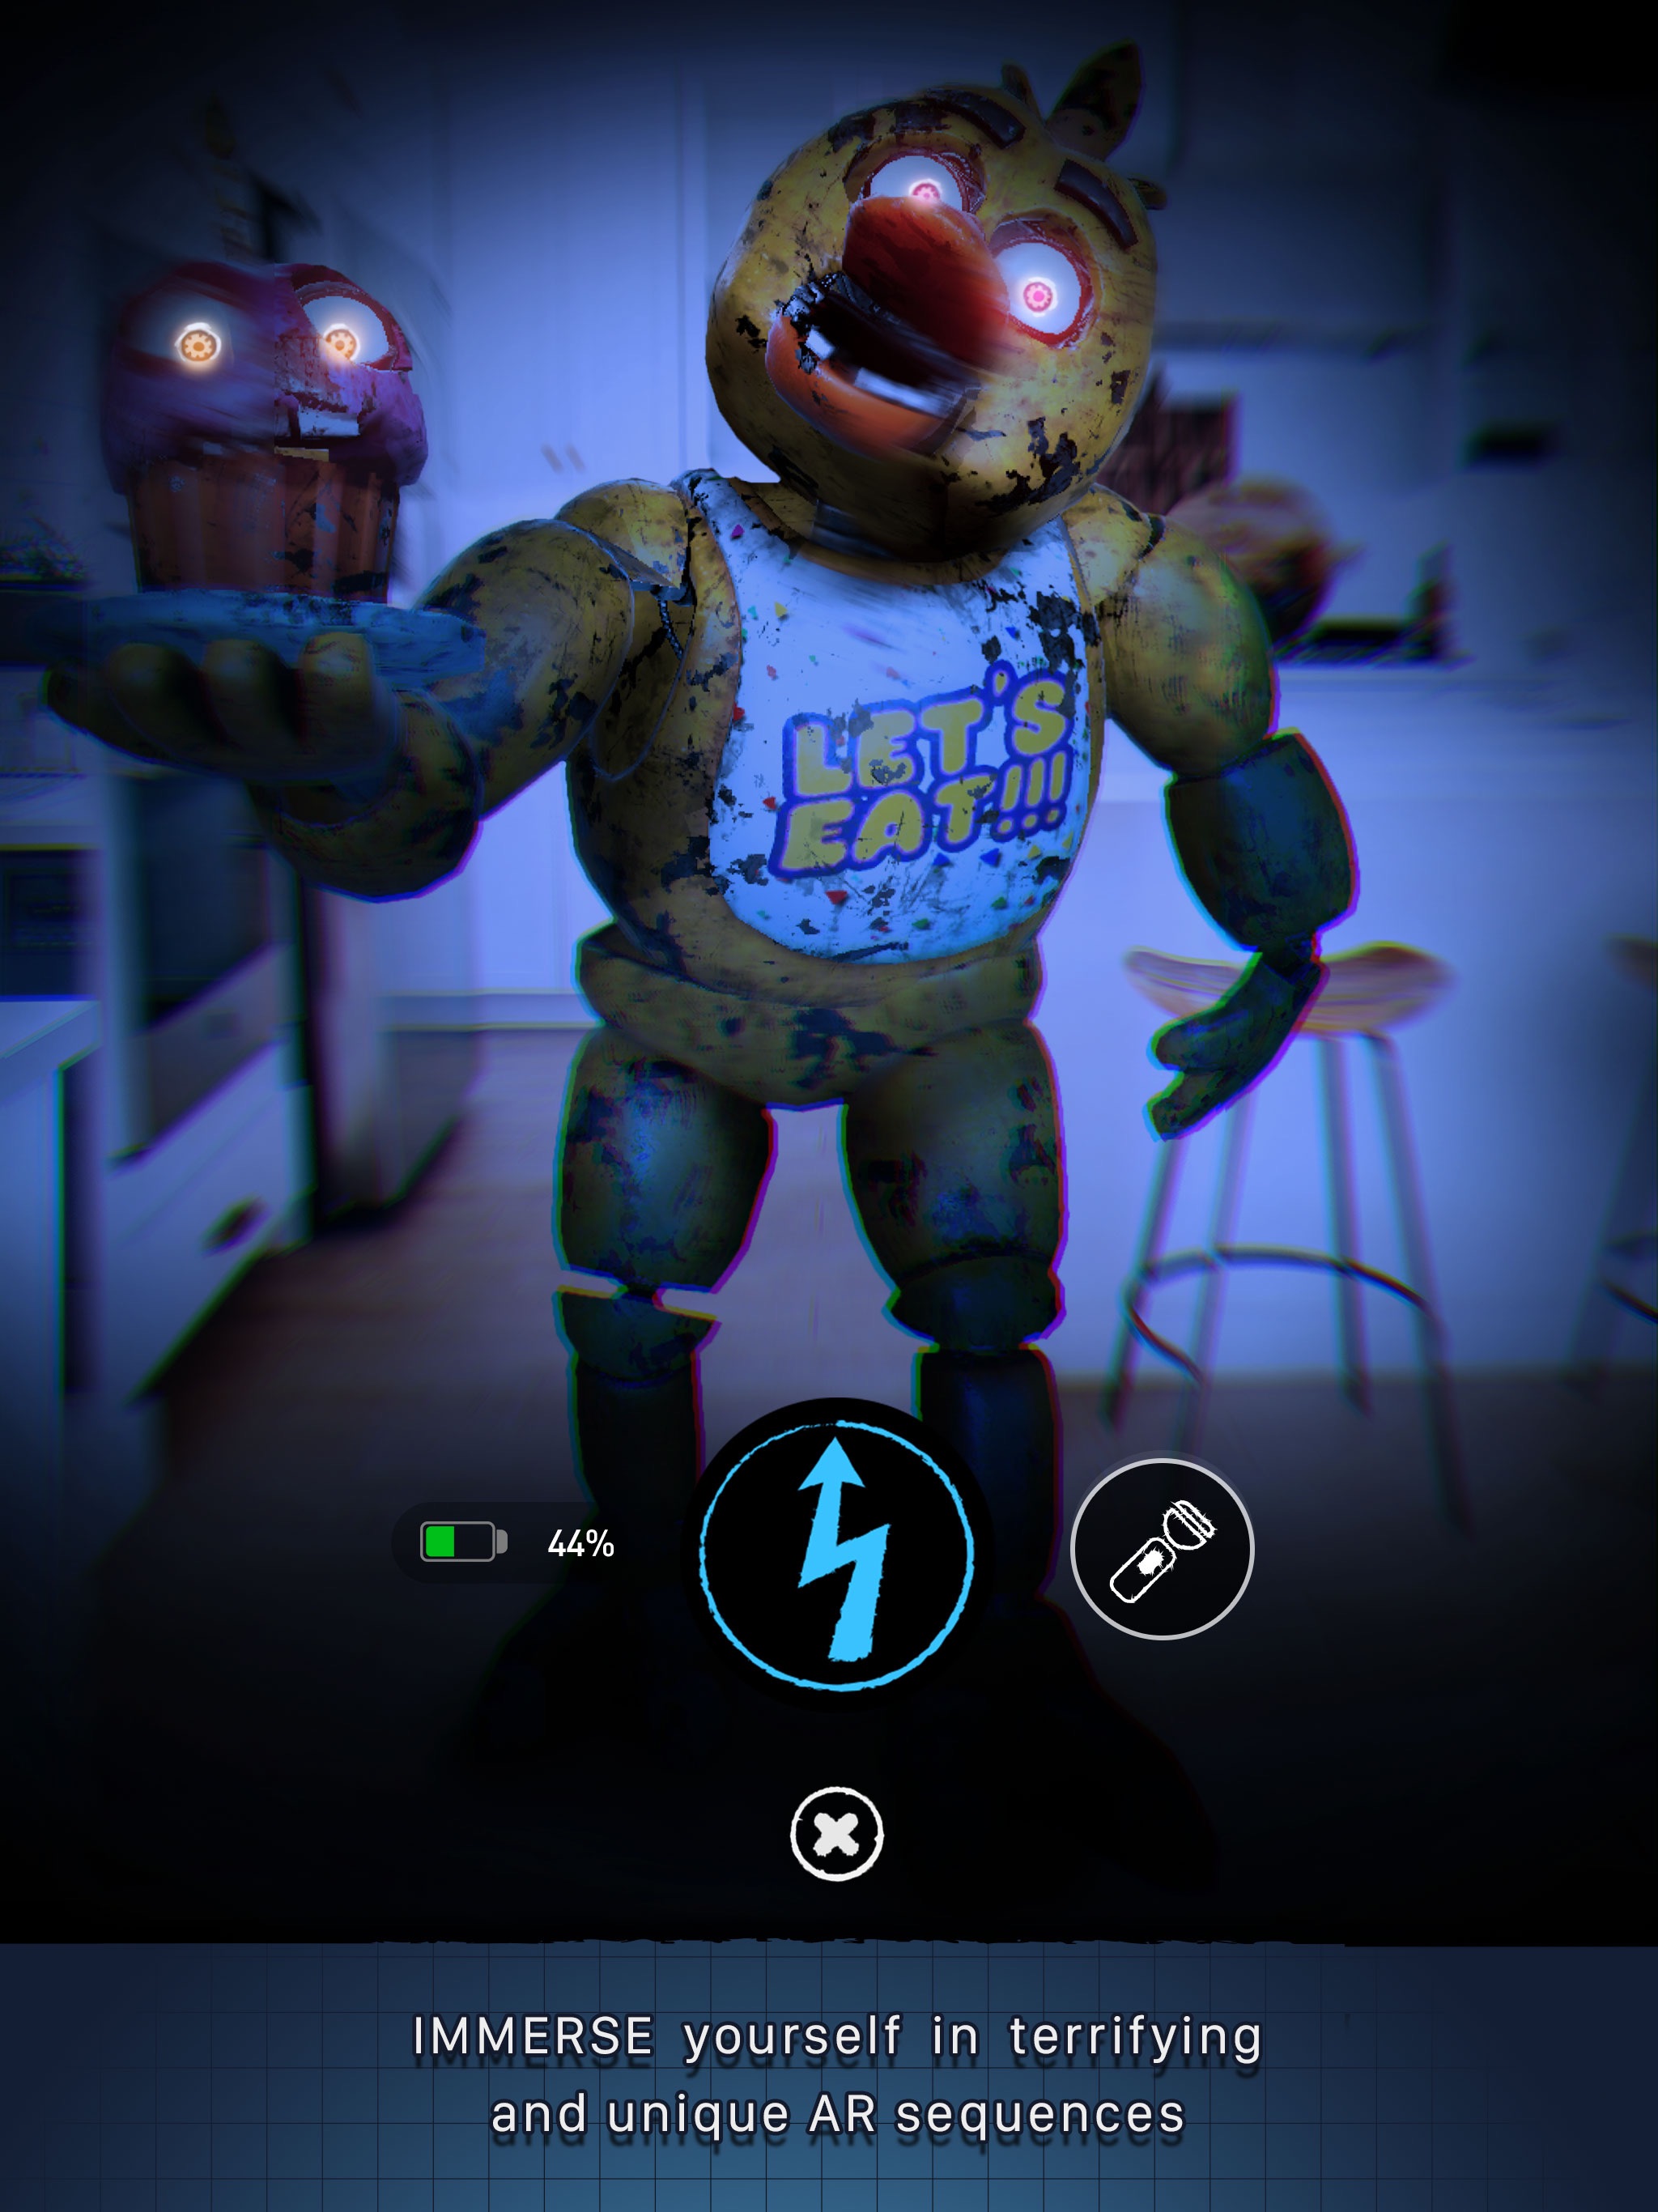 Download Five Nights at Freddy’s AR game for iOS/Android